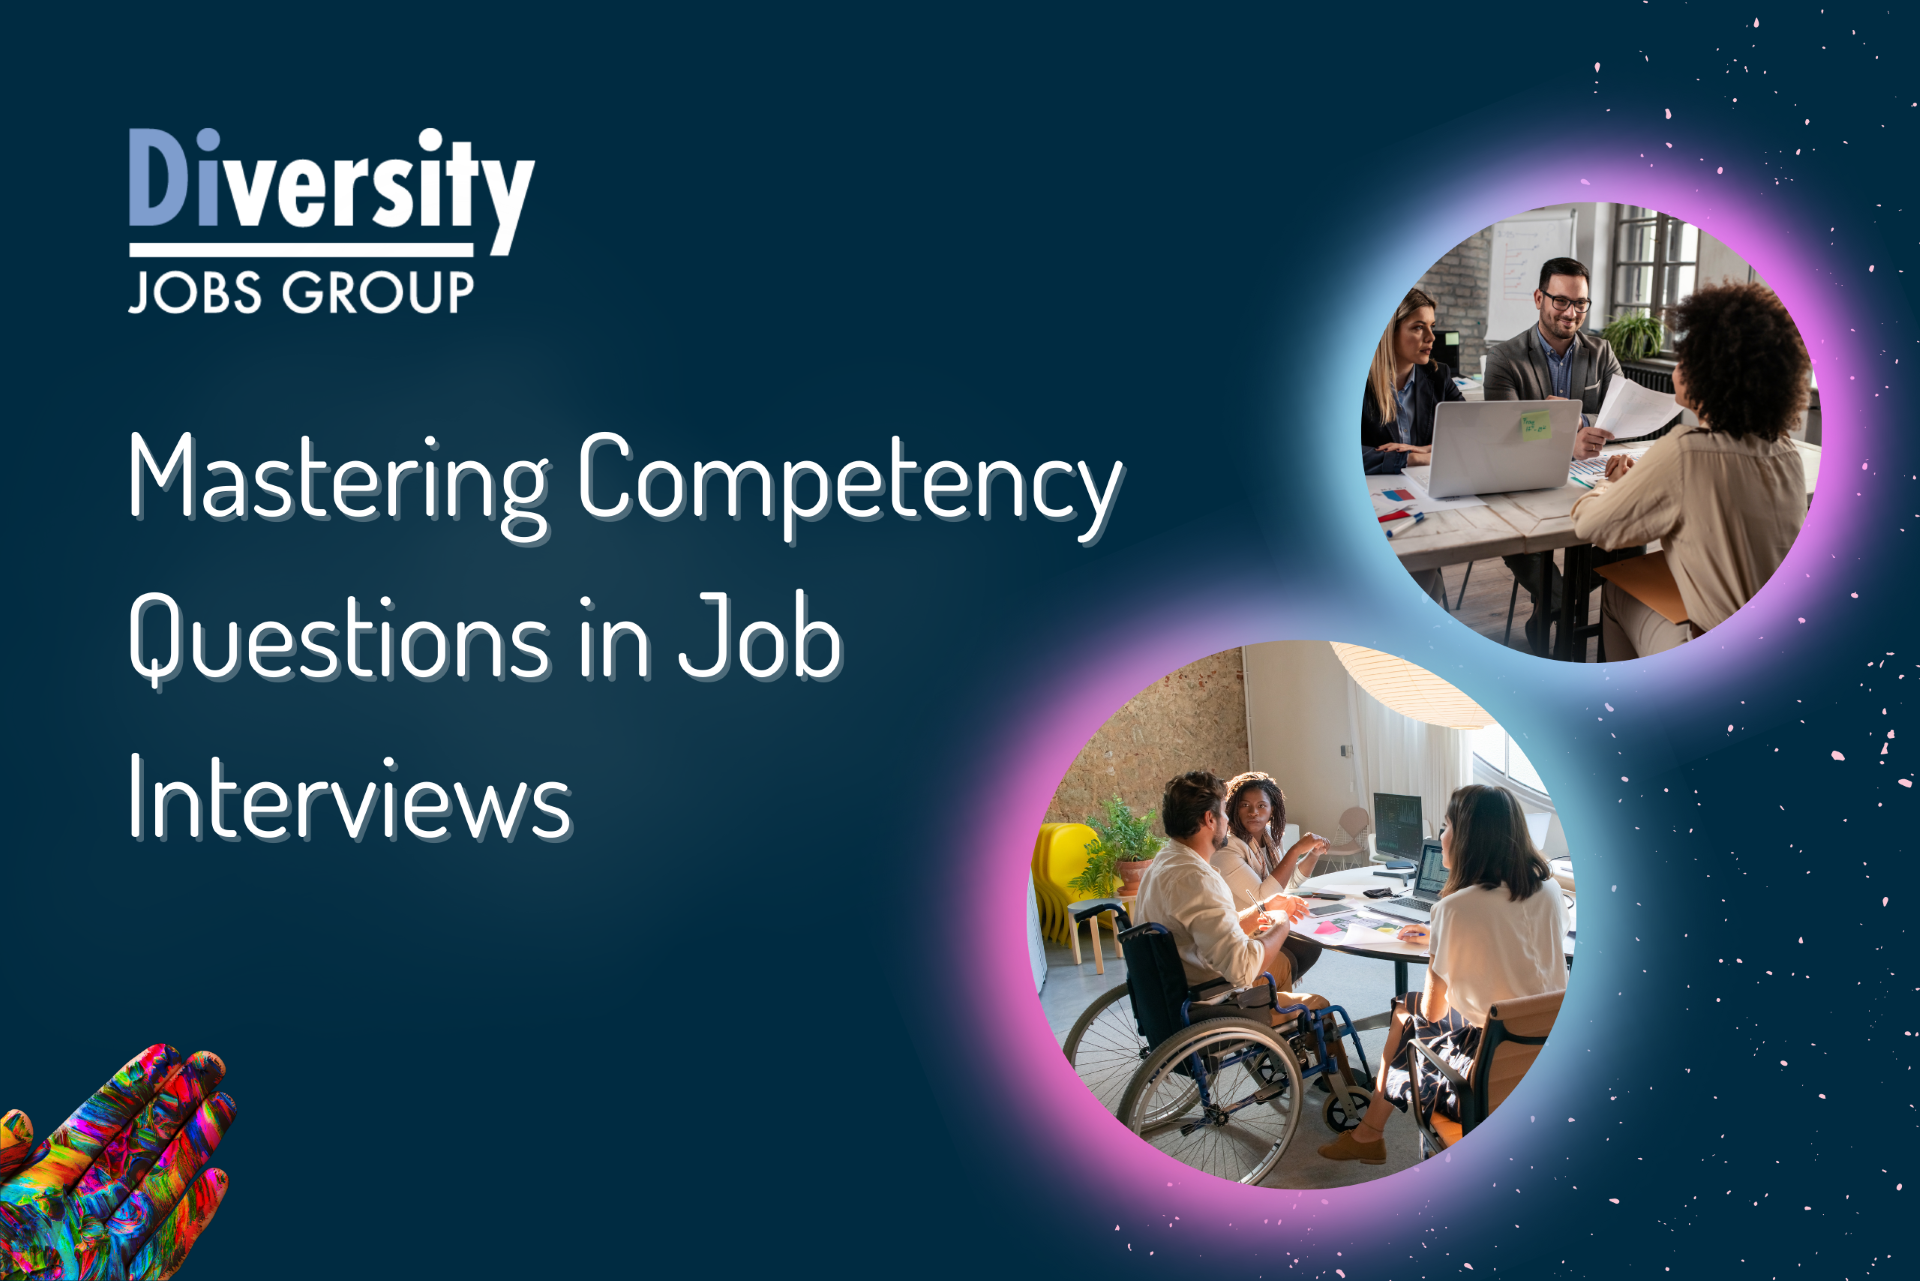 Mastering Competency Questions in Job Interviews